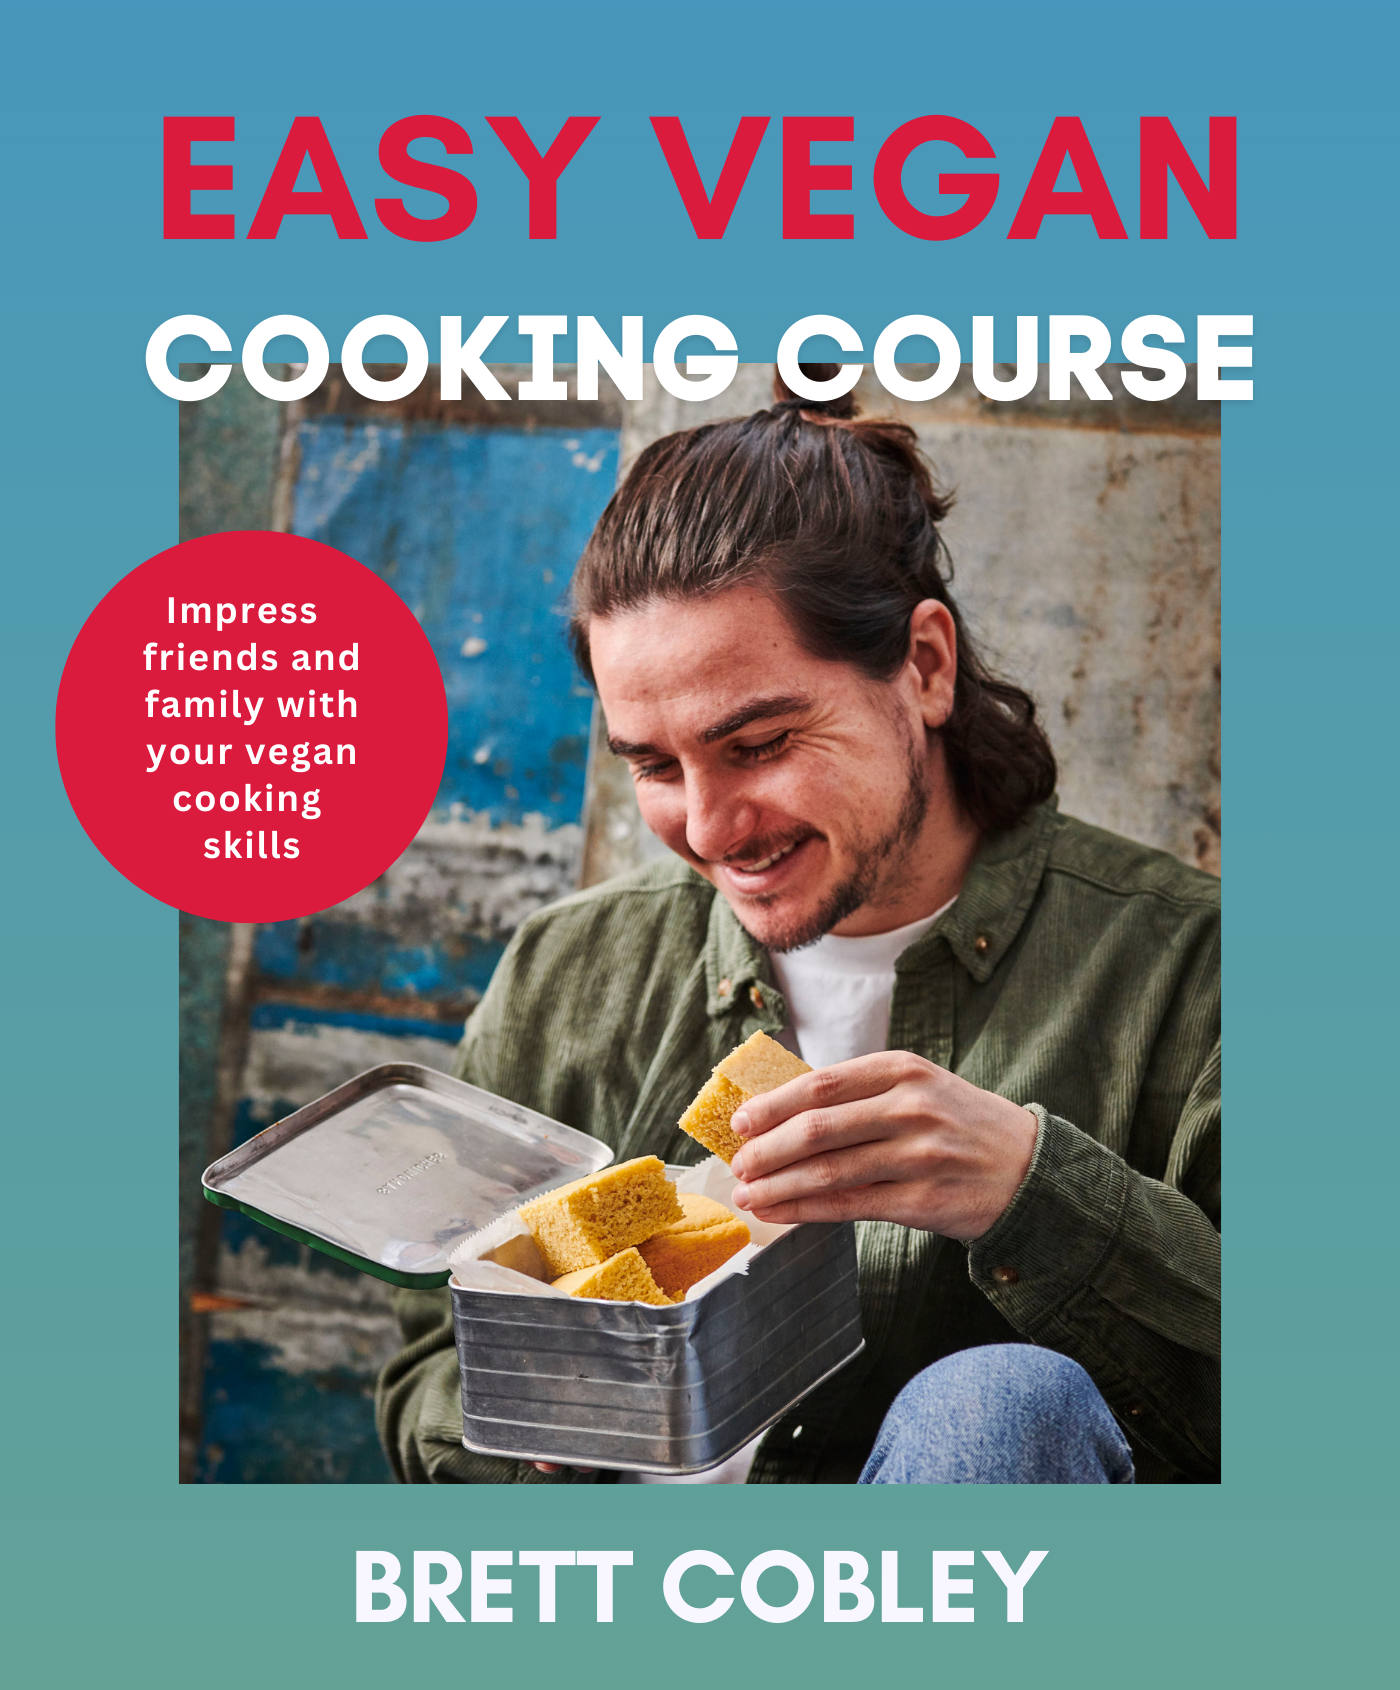 90% OFF SALE - Easy Vegan Cooking Course